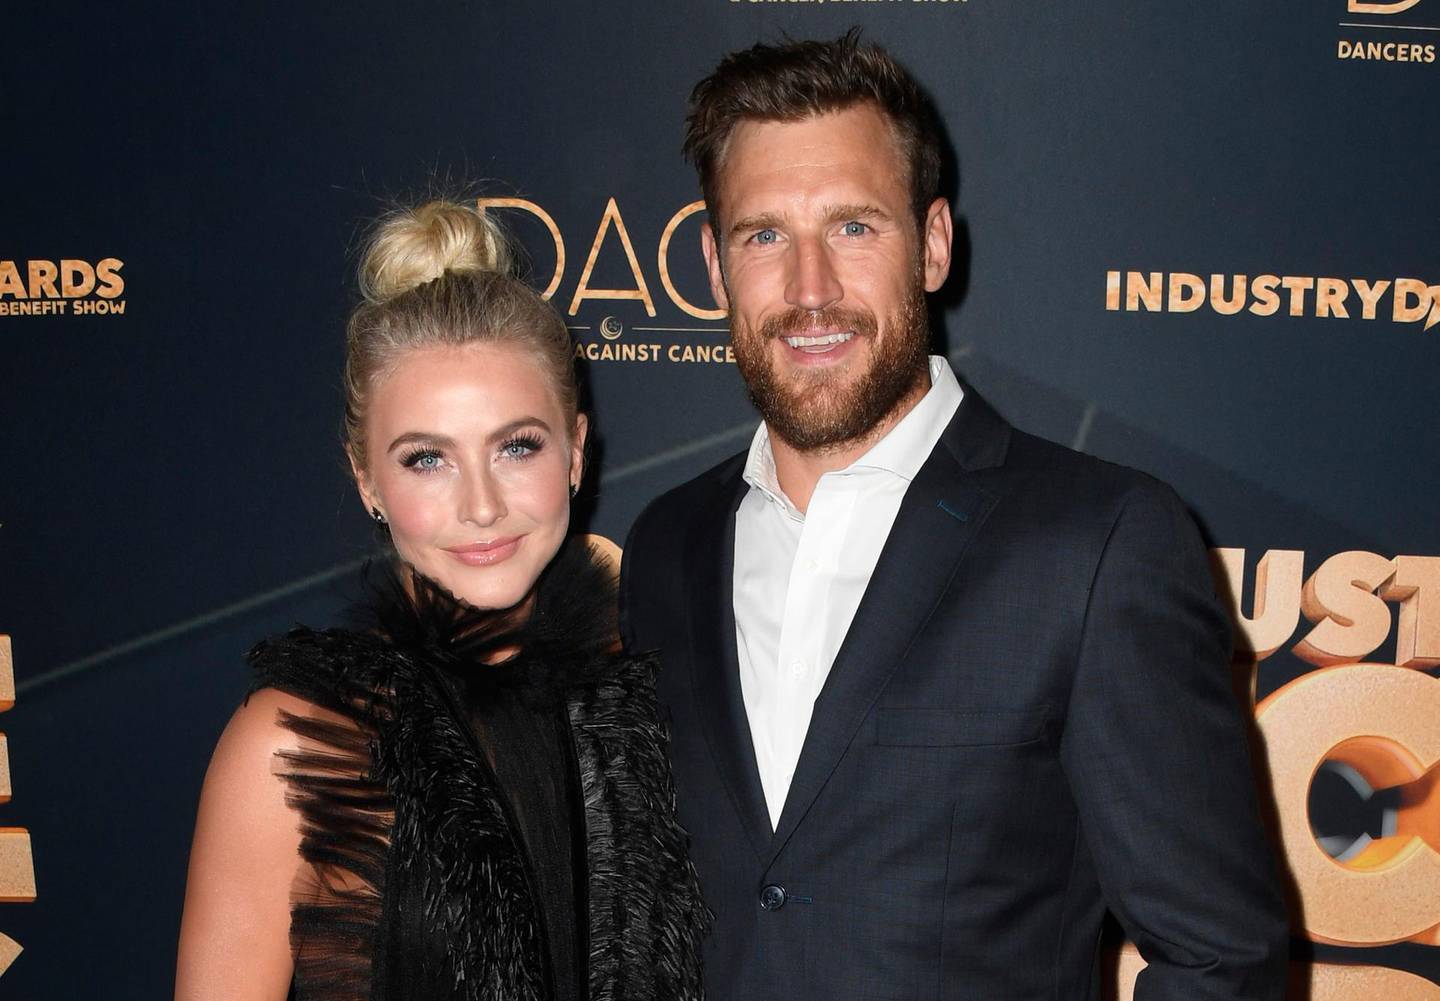 LOS ANGELES, CALIFORNIA - AUGUST 14: Julianne Hough and Brooks Laich attend the 2019 Industry Dance Awards at Avalon Hollywood on August 14, 2019 in Los Angeles, California.   Frazer Harrison/Getty Images/AFP